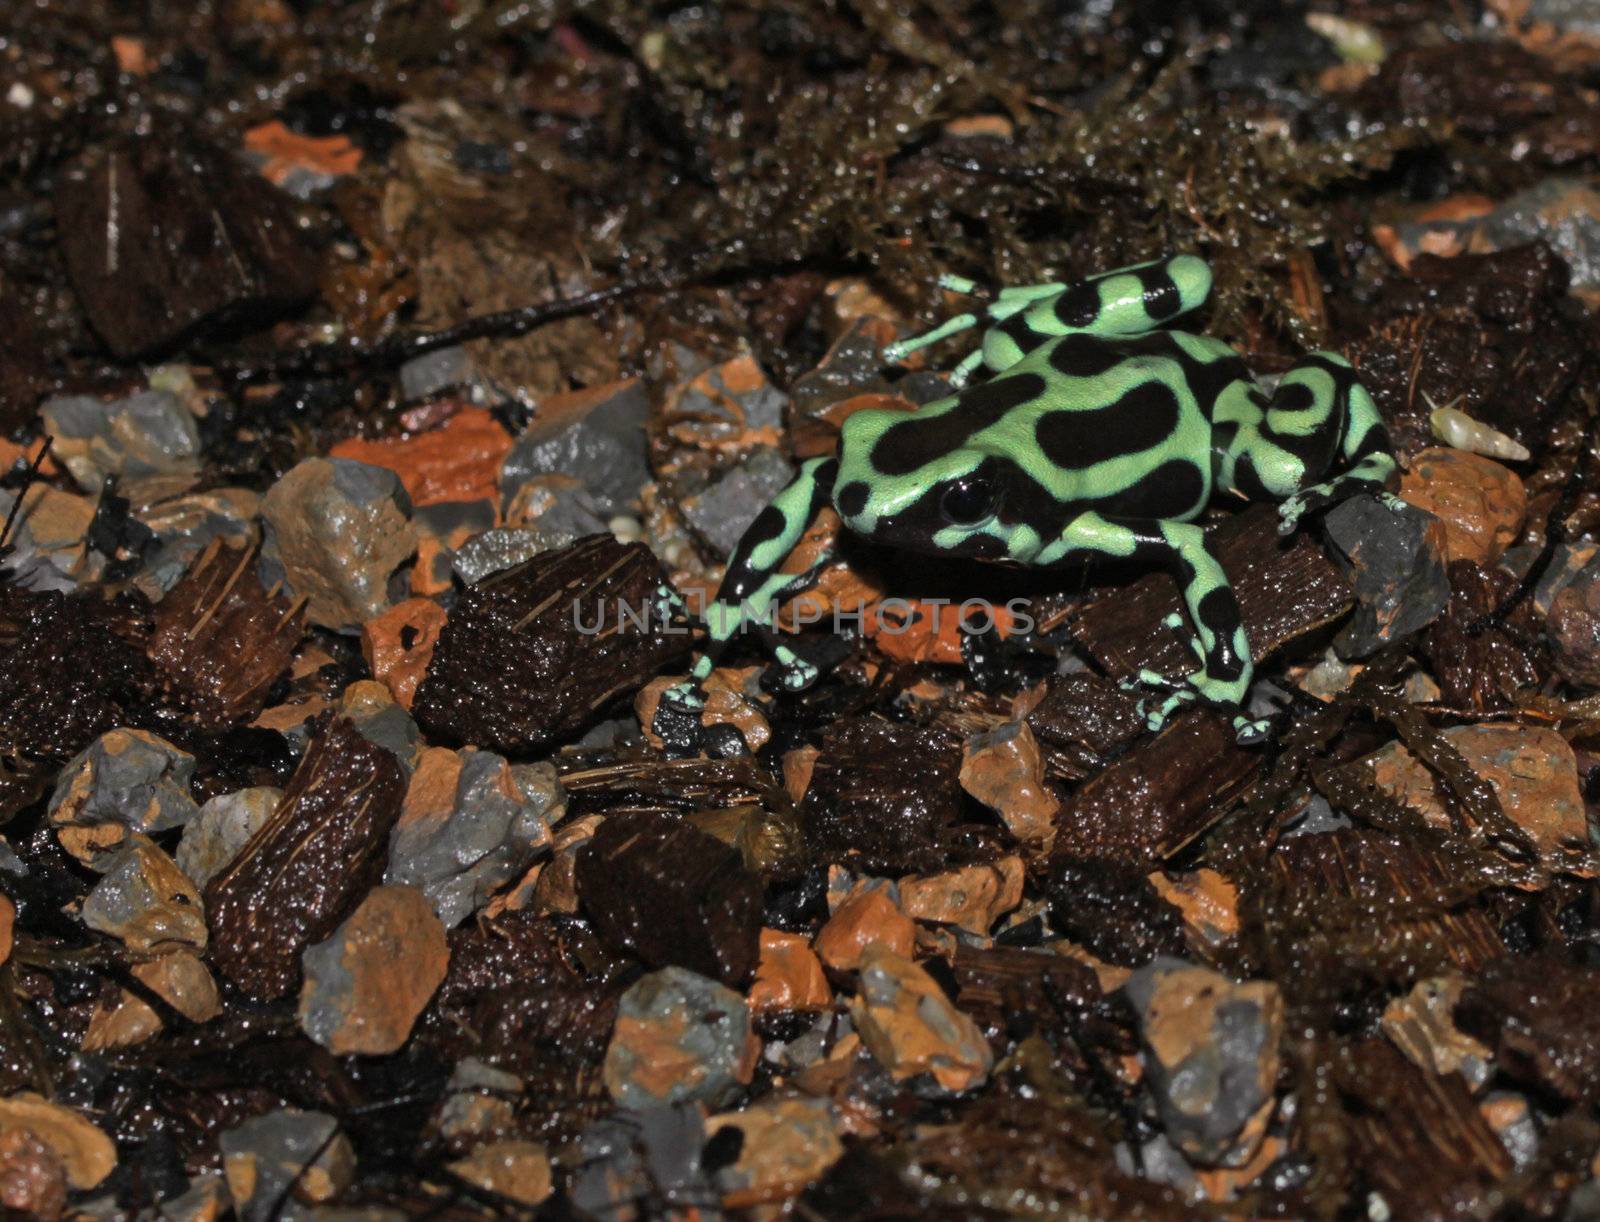 A Green and Black Poison Dart Frog (Dendrobates auratus) is a poison dart frog native to Central America and northwestern South America.